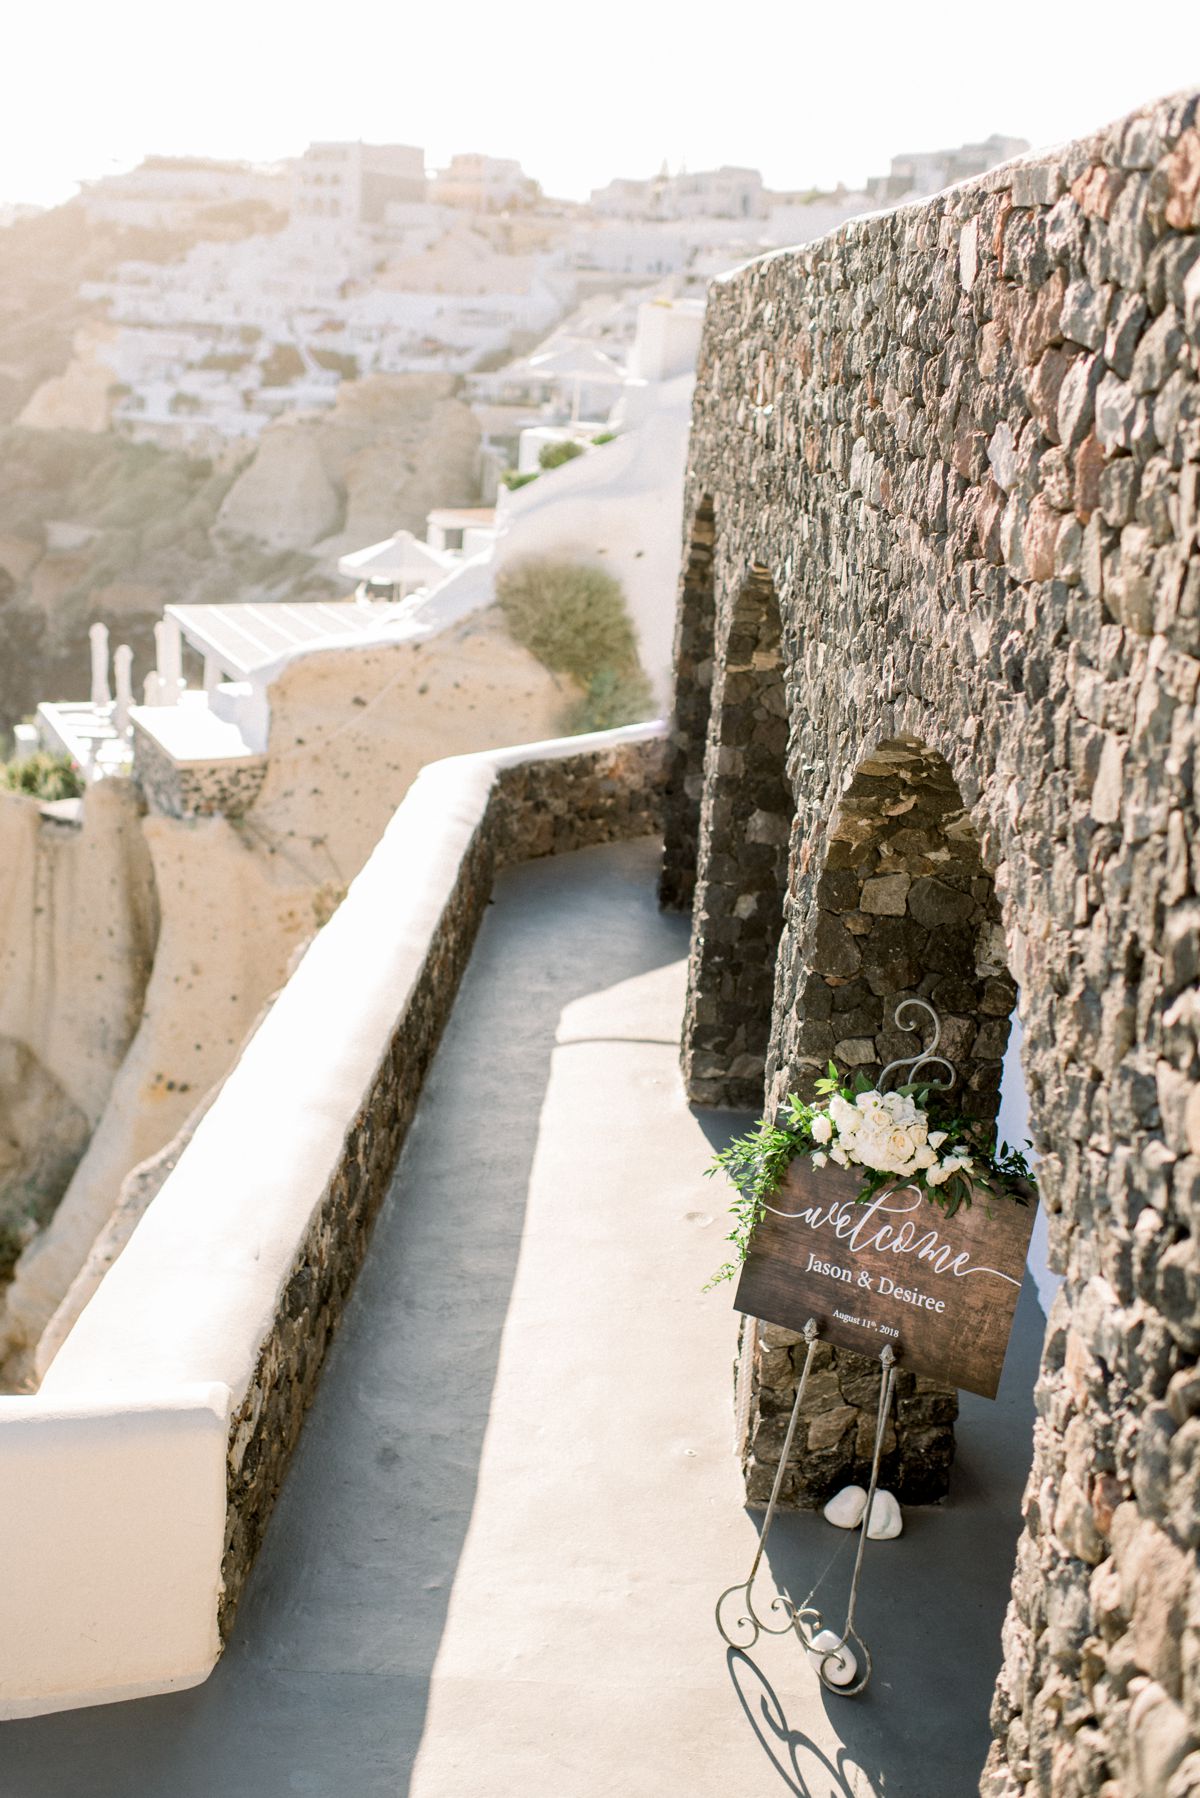 Ceremony for intimate wedding at Canaves Oia, Santorini